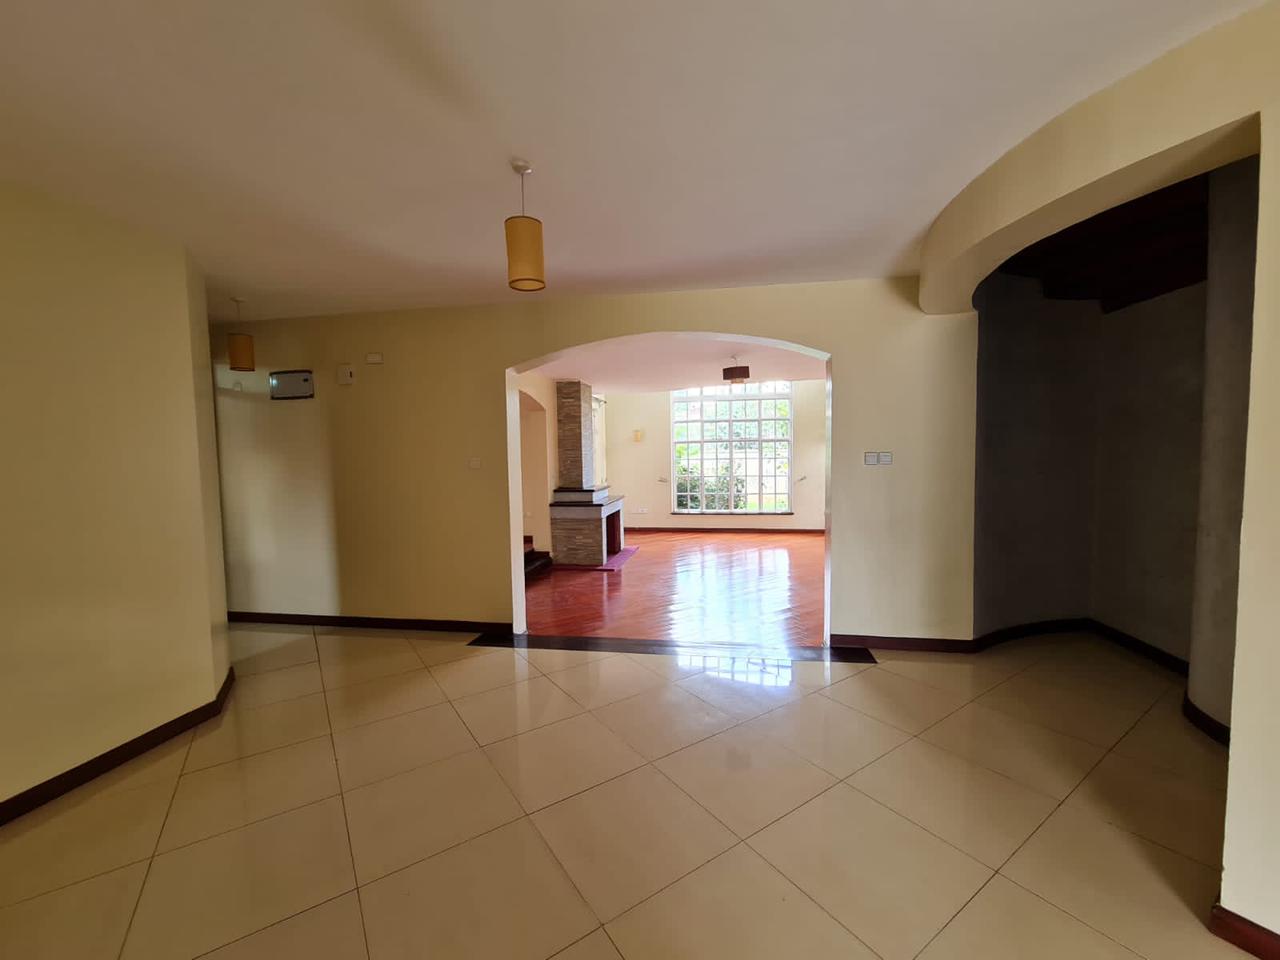 4 Bedroom House all en-suite plus Dsq for 2 Sitting on half an acre for Rent at Ksh300k in a gated community in Karen (6)